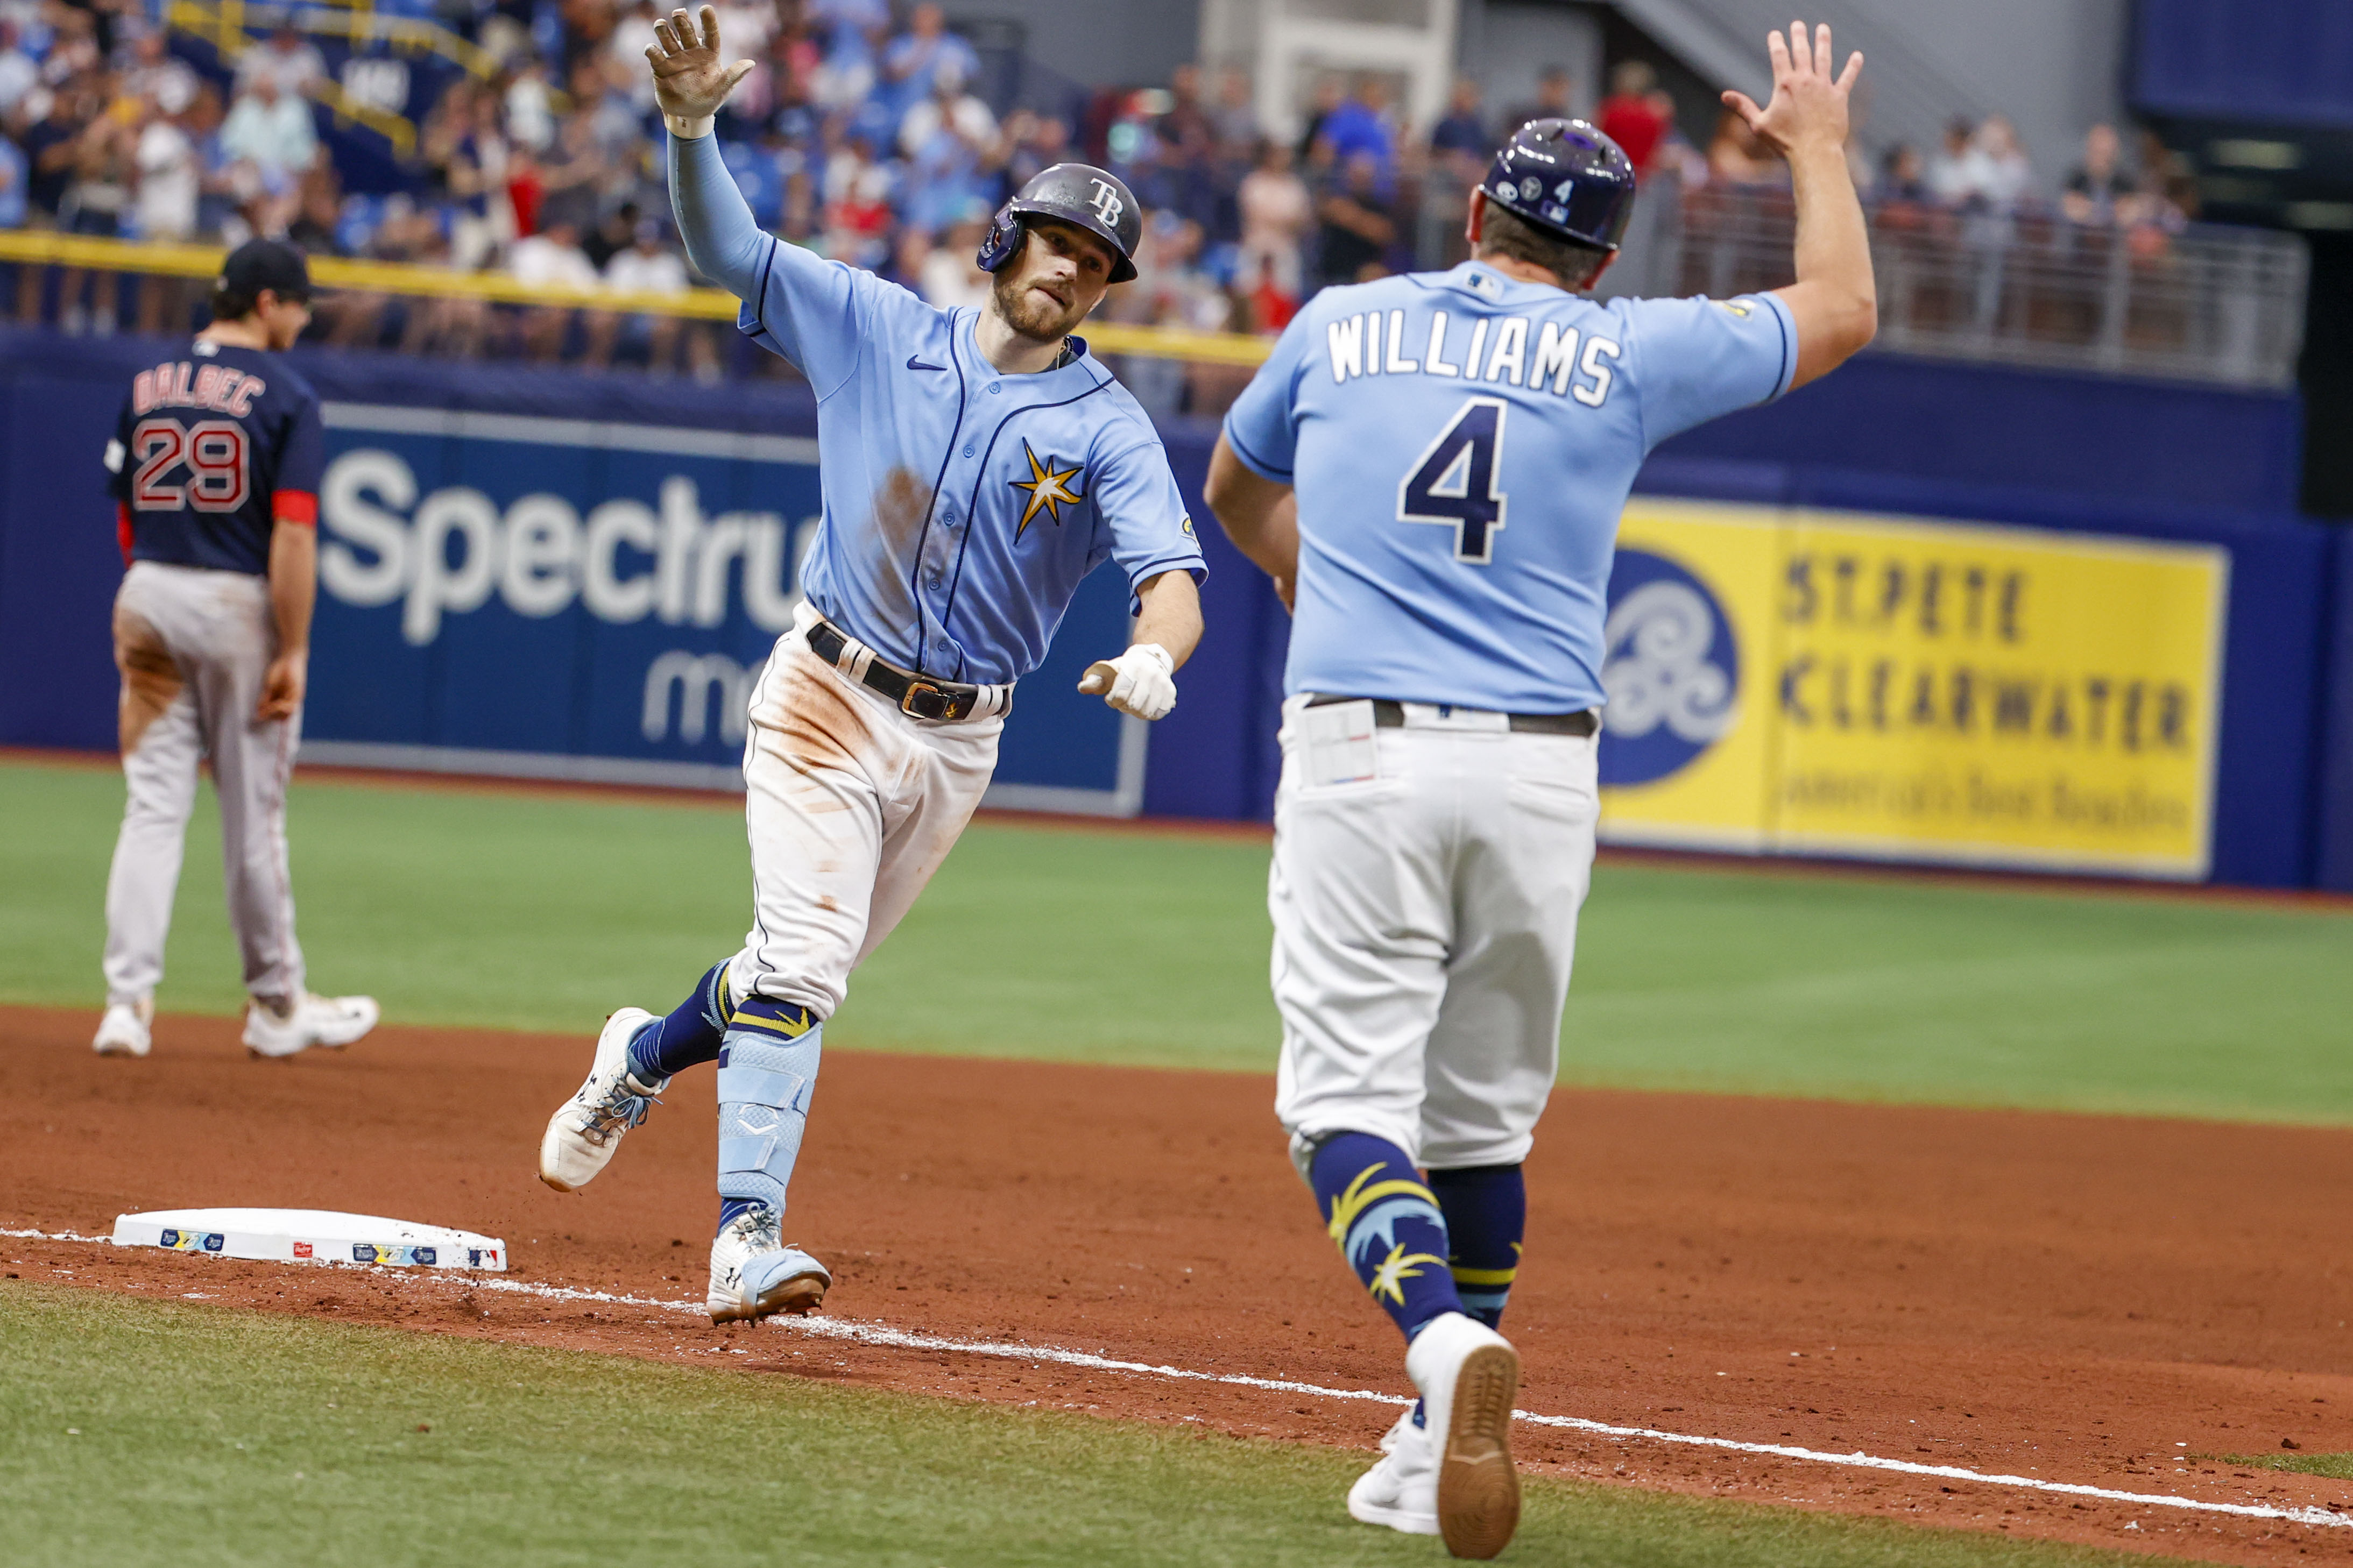 Rays tie record with 13-0 start, rally to beat Red Sox 9-3